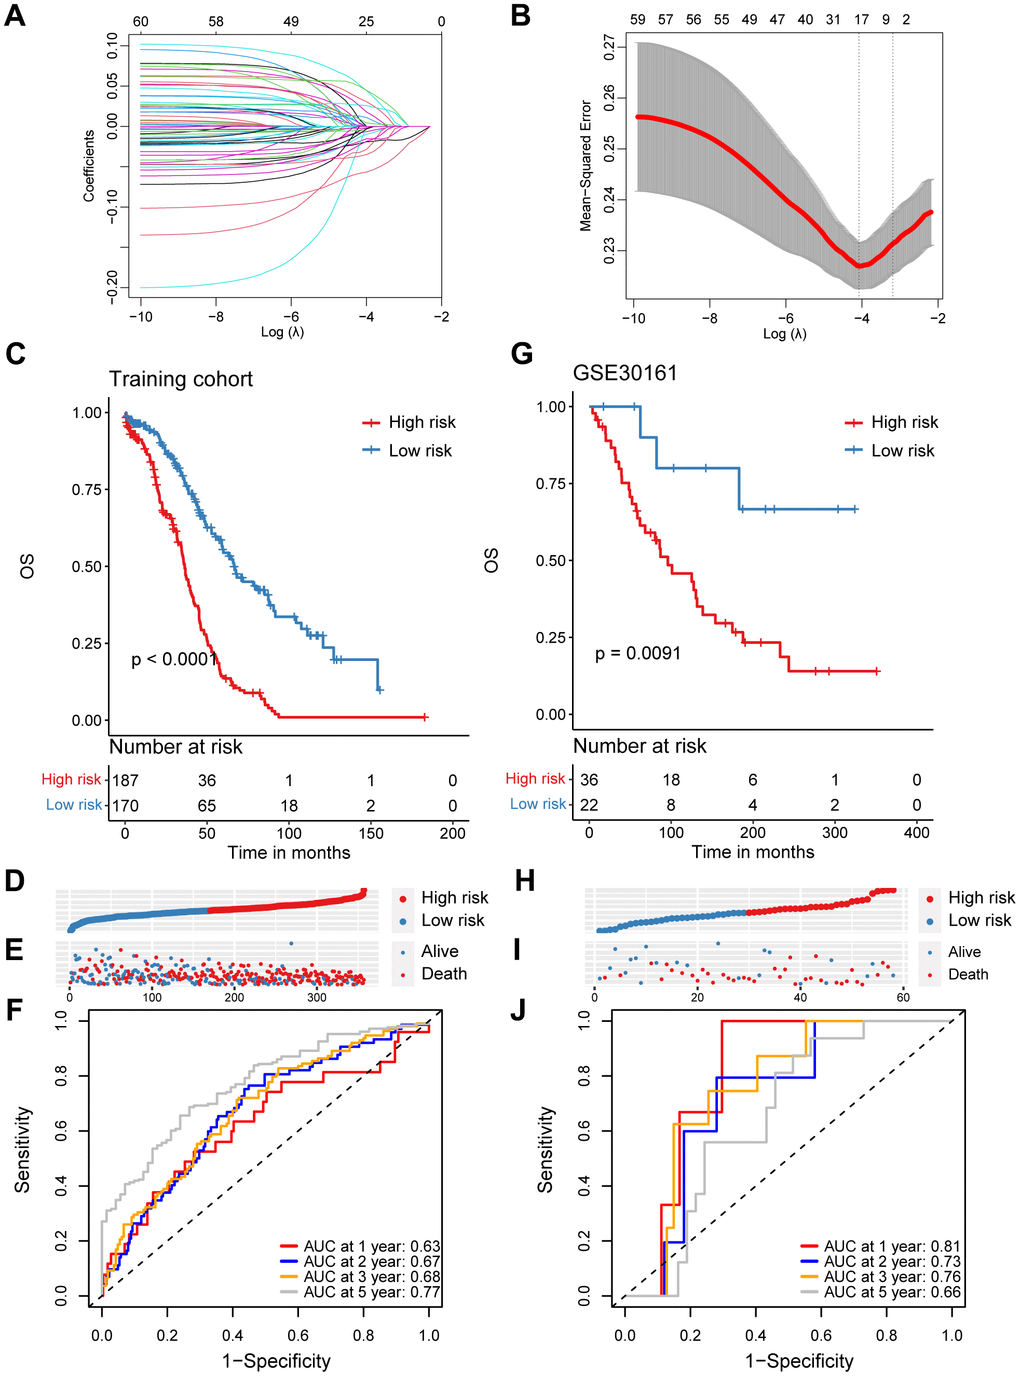 Construction and validation of a prognostic model based on specific CD8+ T cell markers in ovarian cancer. (A) Coefficient profiles in the LASSO regression model. (B) Cross-validation for tuning parameter selection in the LASSO regression. (C) Kaplan-Meier survival analysis was performed on the relationship between the risk score and OS using the TCGA training cohort. (D) The rank of risk score in the TCGA training cohort. (E) Survival status in the TCGA training cohort. (F) Time-dependent ROC curve analysis of the prognostic model (1, 2, 3, and 5 years) in the TCGA training cohort. (G) Kaplan-Meier survival analysis was performed on the relationship between the risk score and OS using the GSE30161 validation cohort. (H) The rank of risk score in the GSE30161 validation cohort. (I) Survival status in the GSE30161 validation cohort. (J) Time-dependent ROC curve analysis of the prognostic model (1, 2, 3, and 5 years) in the GSE30161 validation cohort.